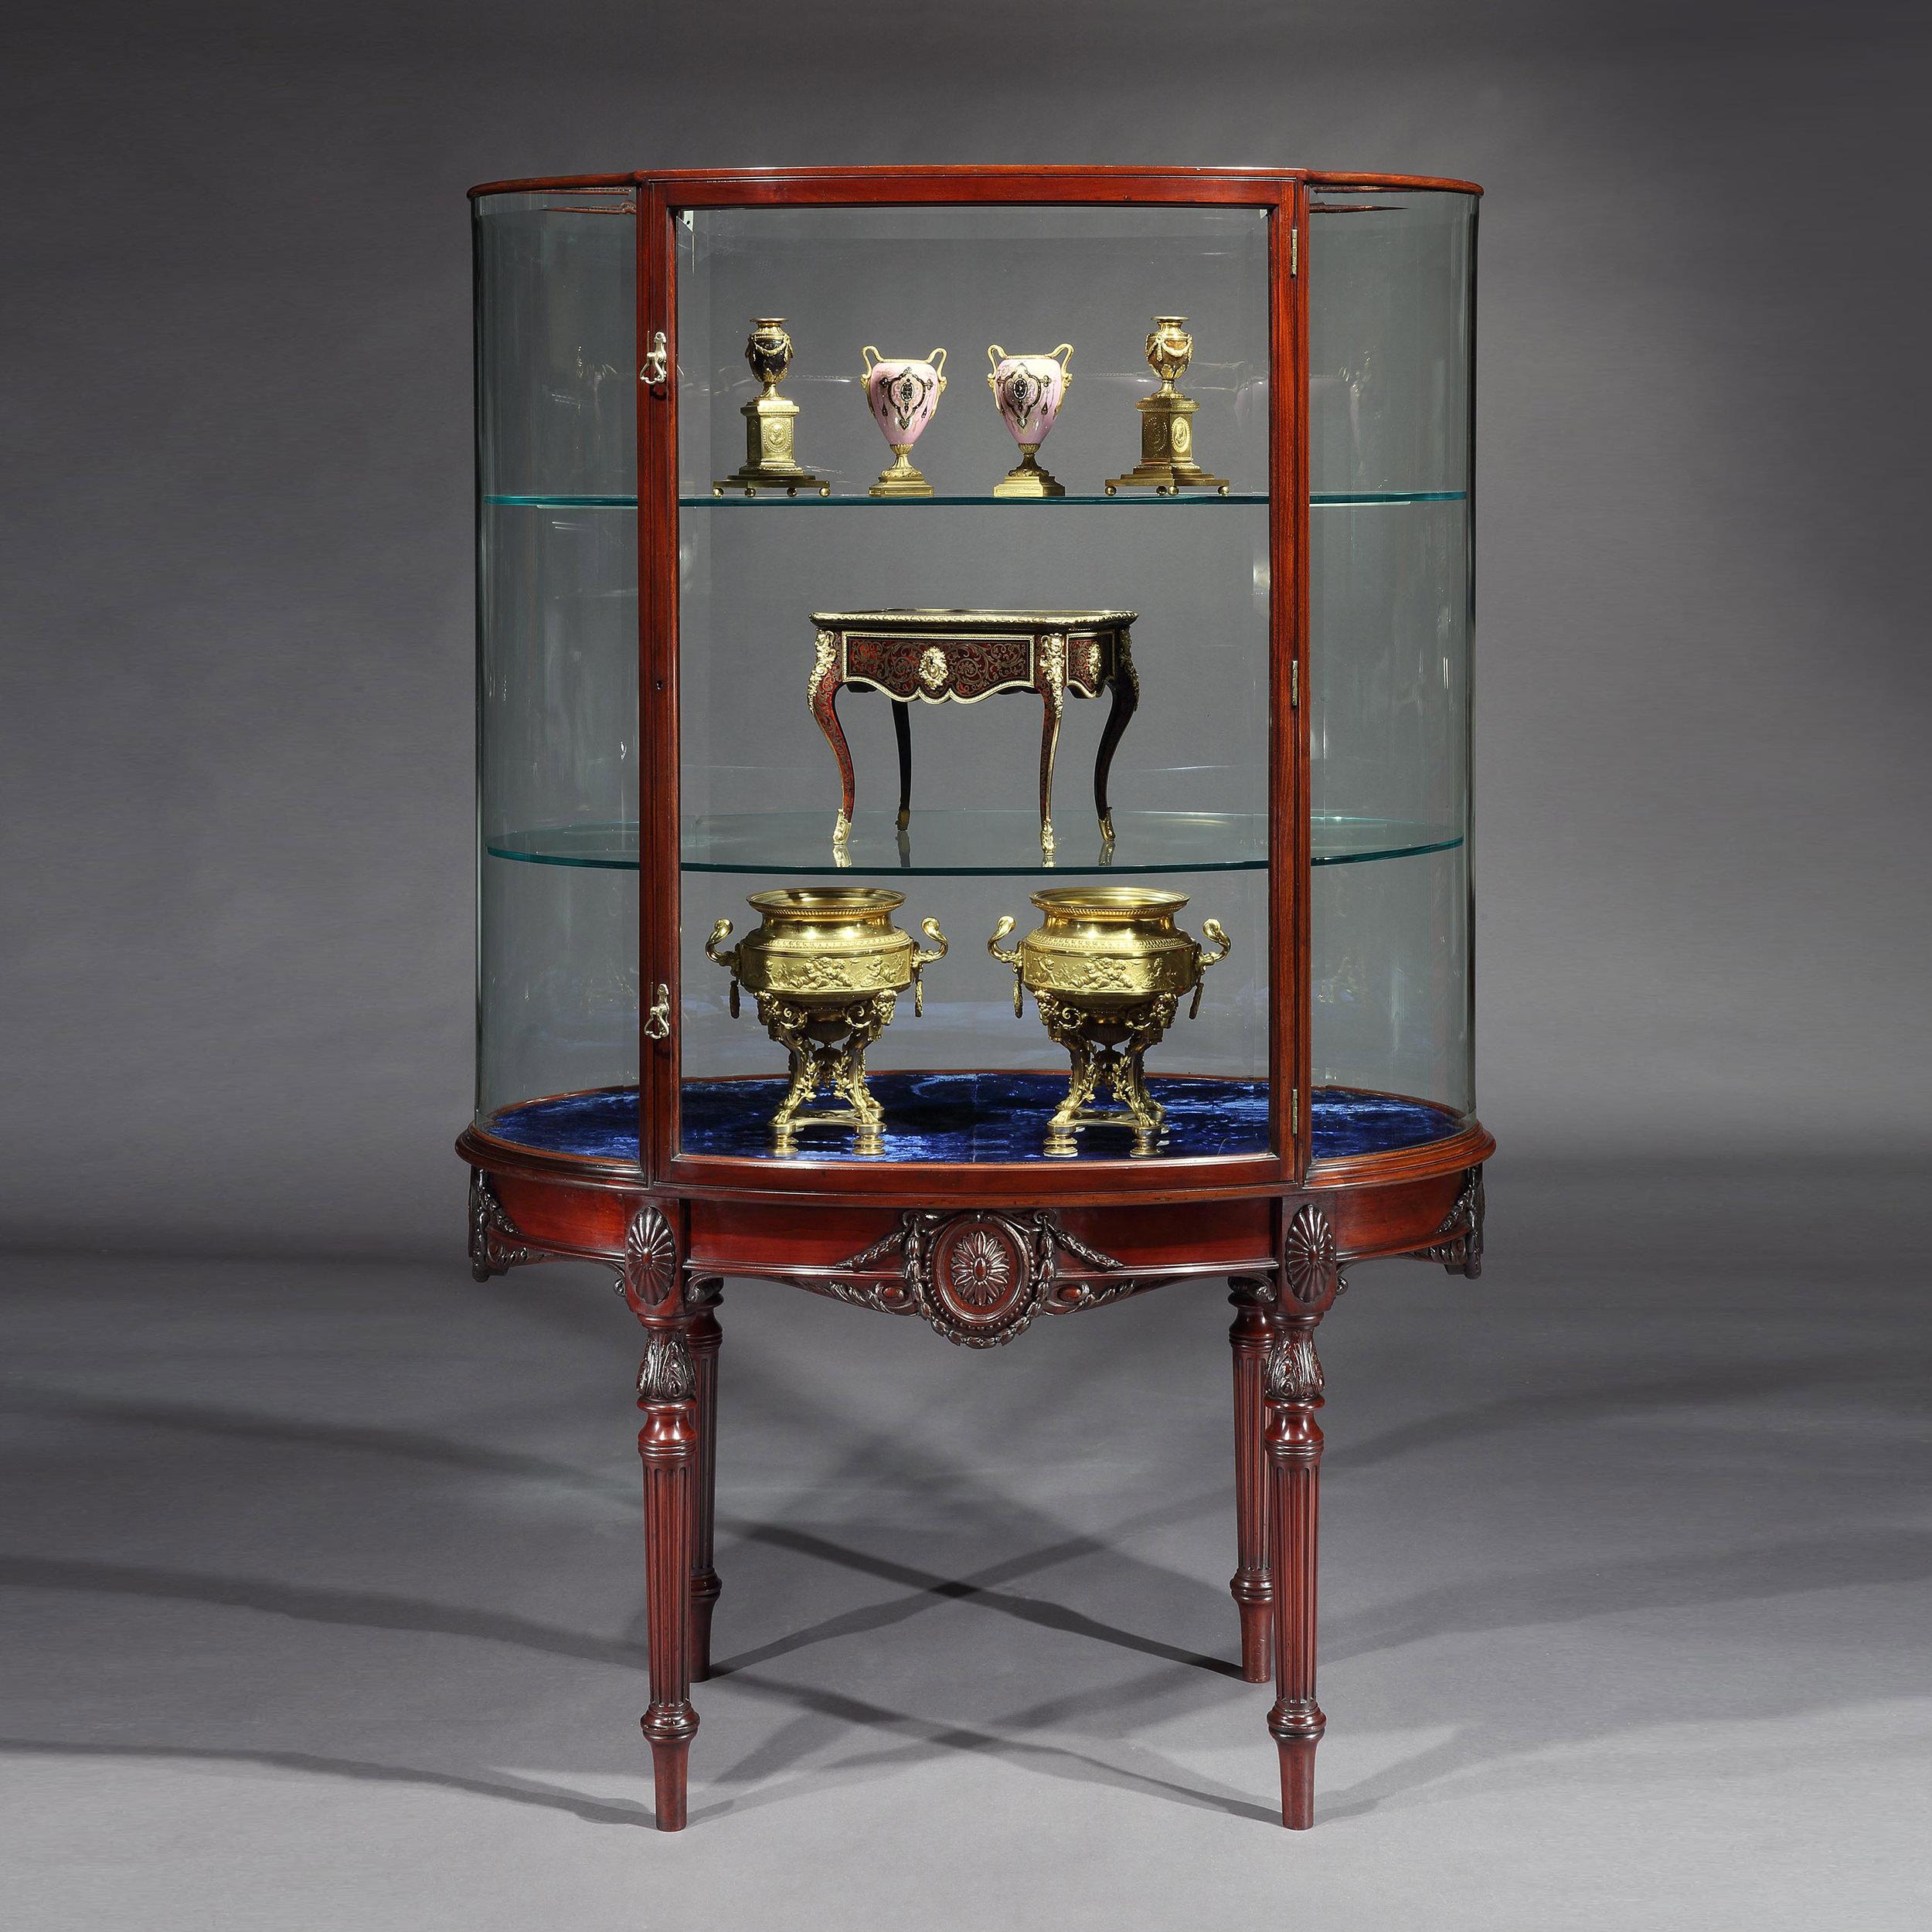 An unusual Edwardian display cabinet
in the Adam manner
By F. Sage & Co

Constructed from solid mahogany, the oval display cabinet supported on turned and reeded legs, its apron decorated in the delicate manner of Robert Adam depicting husking